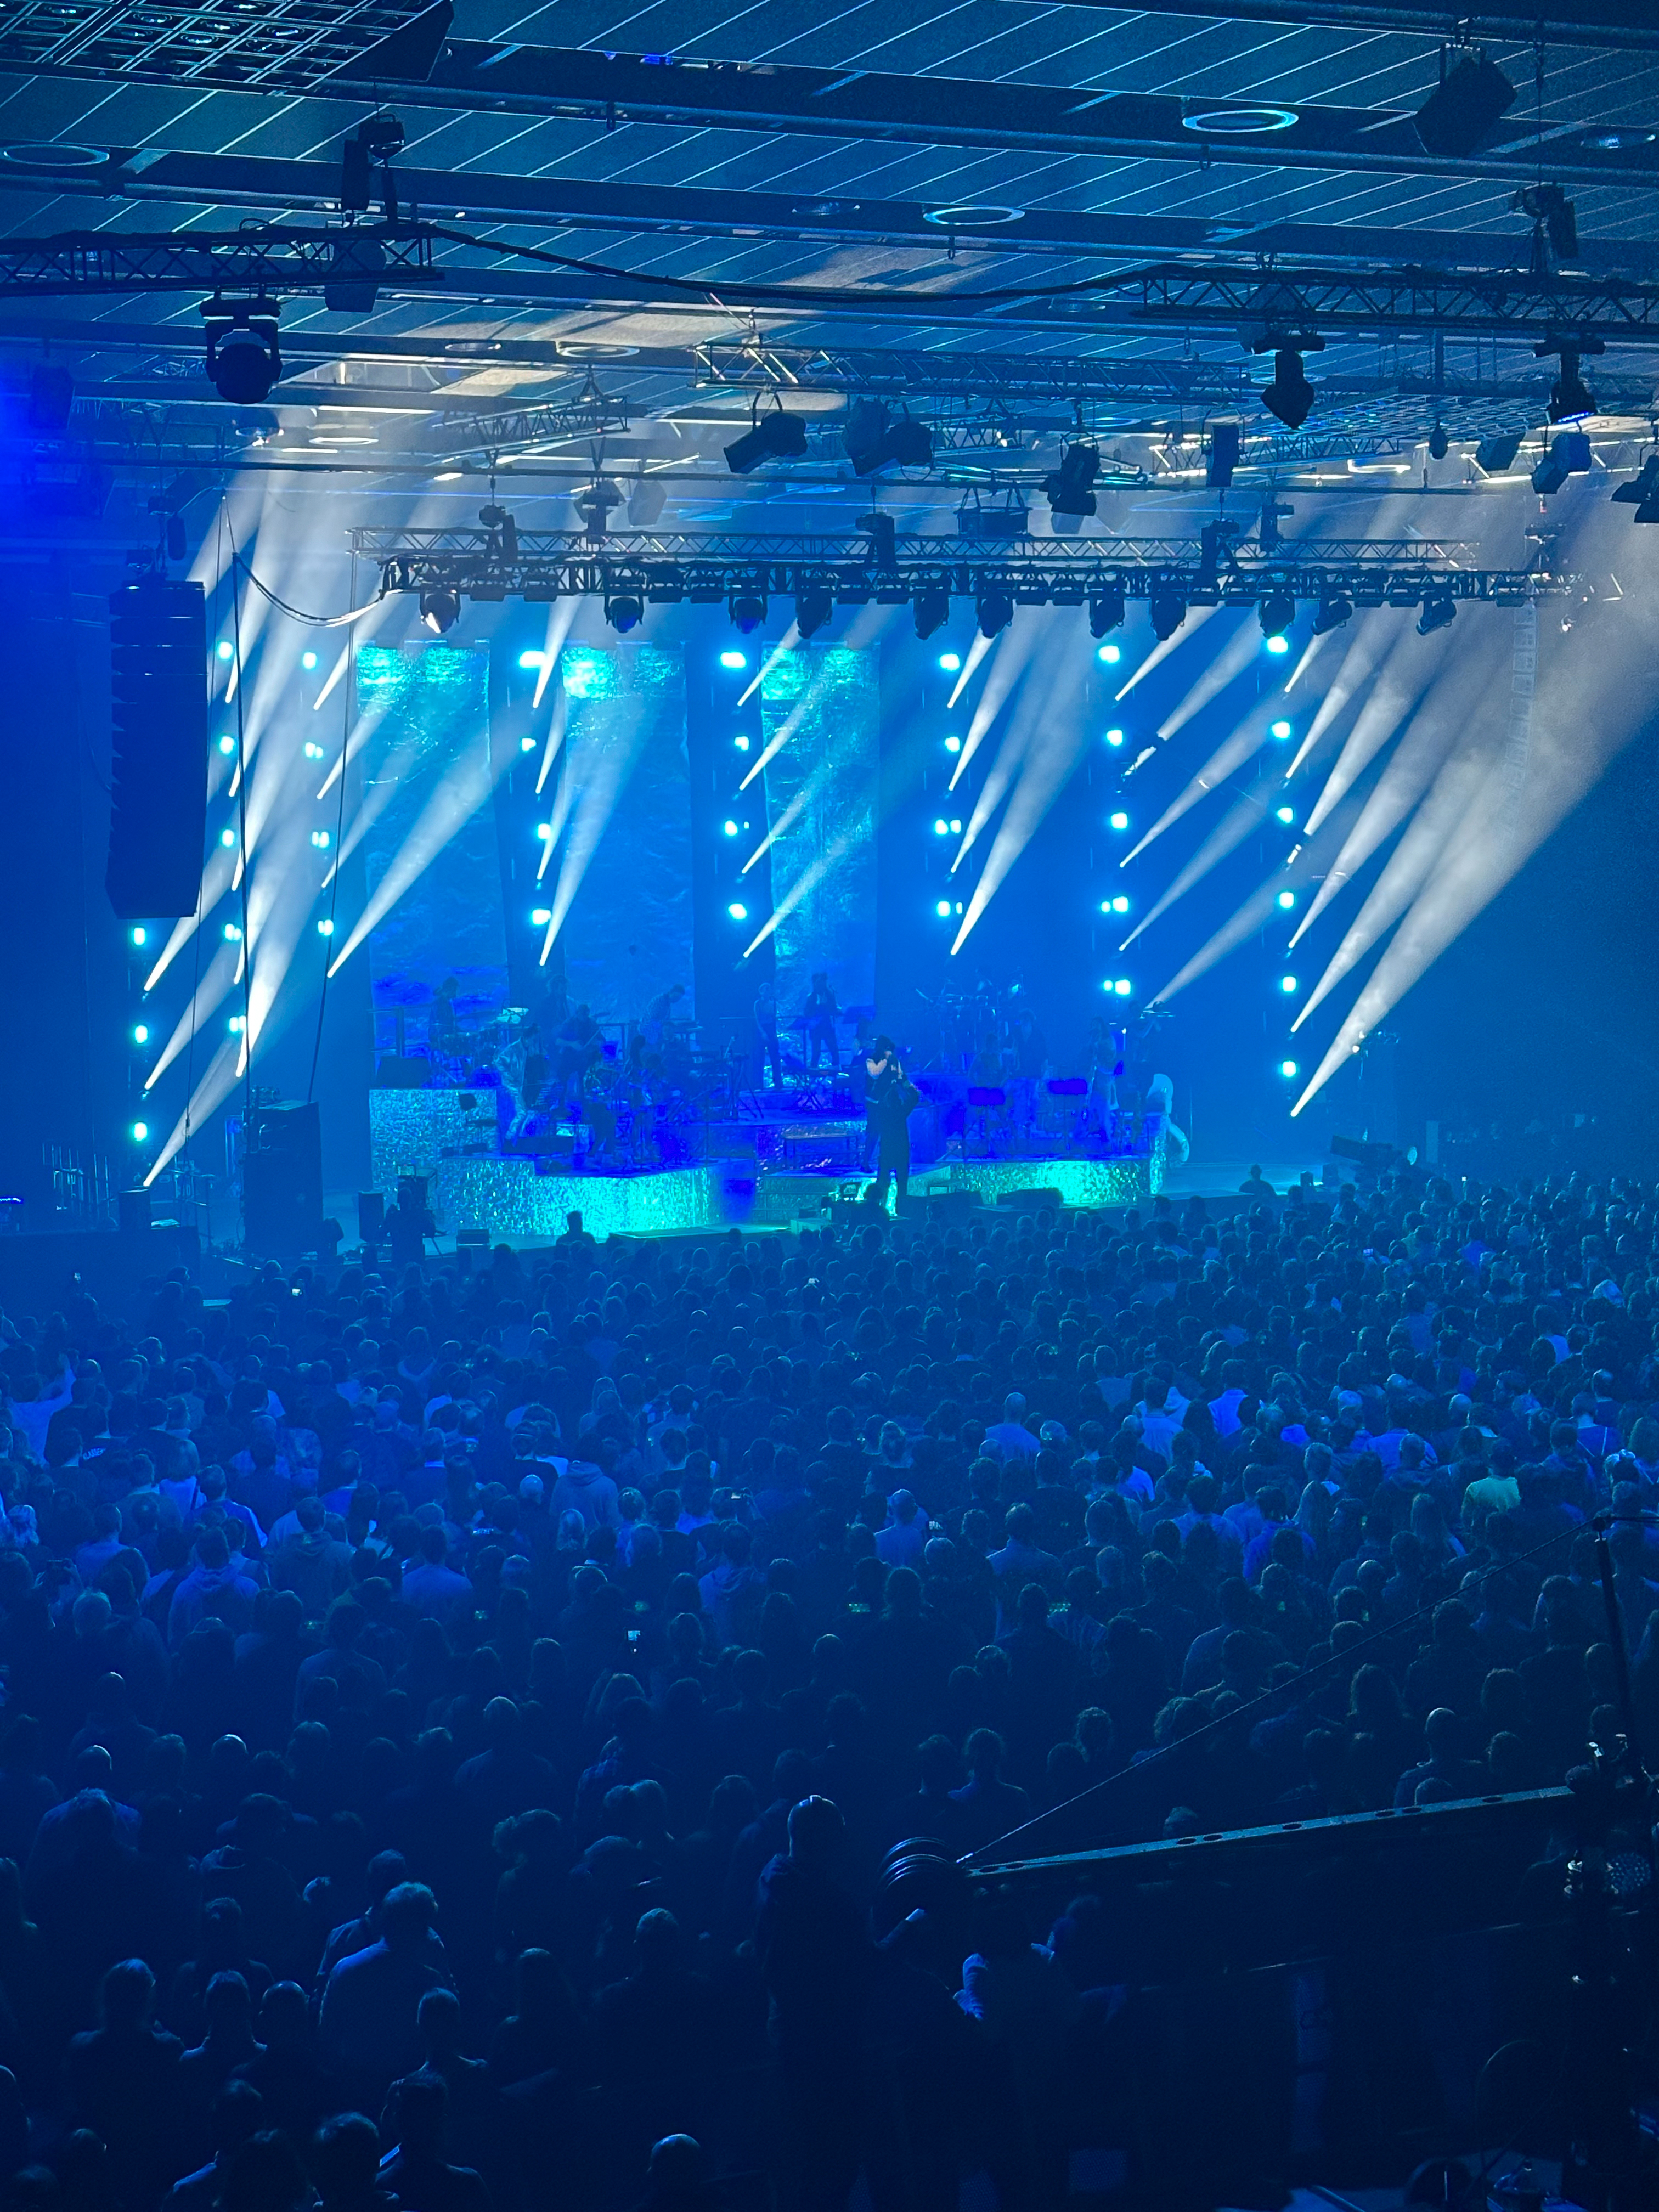 Show event at the RuhrCongress Bochum. People dancing in front of the stage, the hall is illuminated in blue.